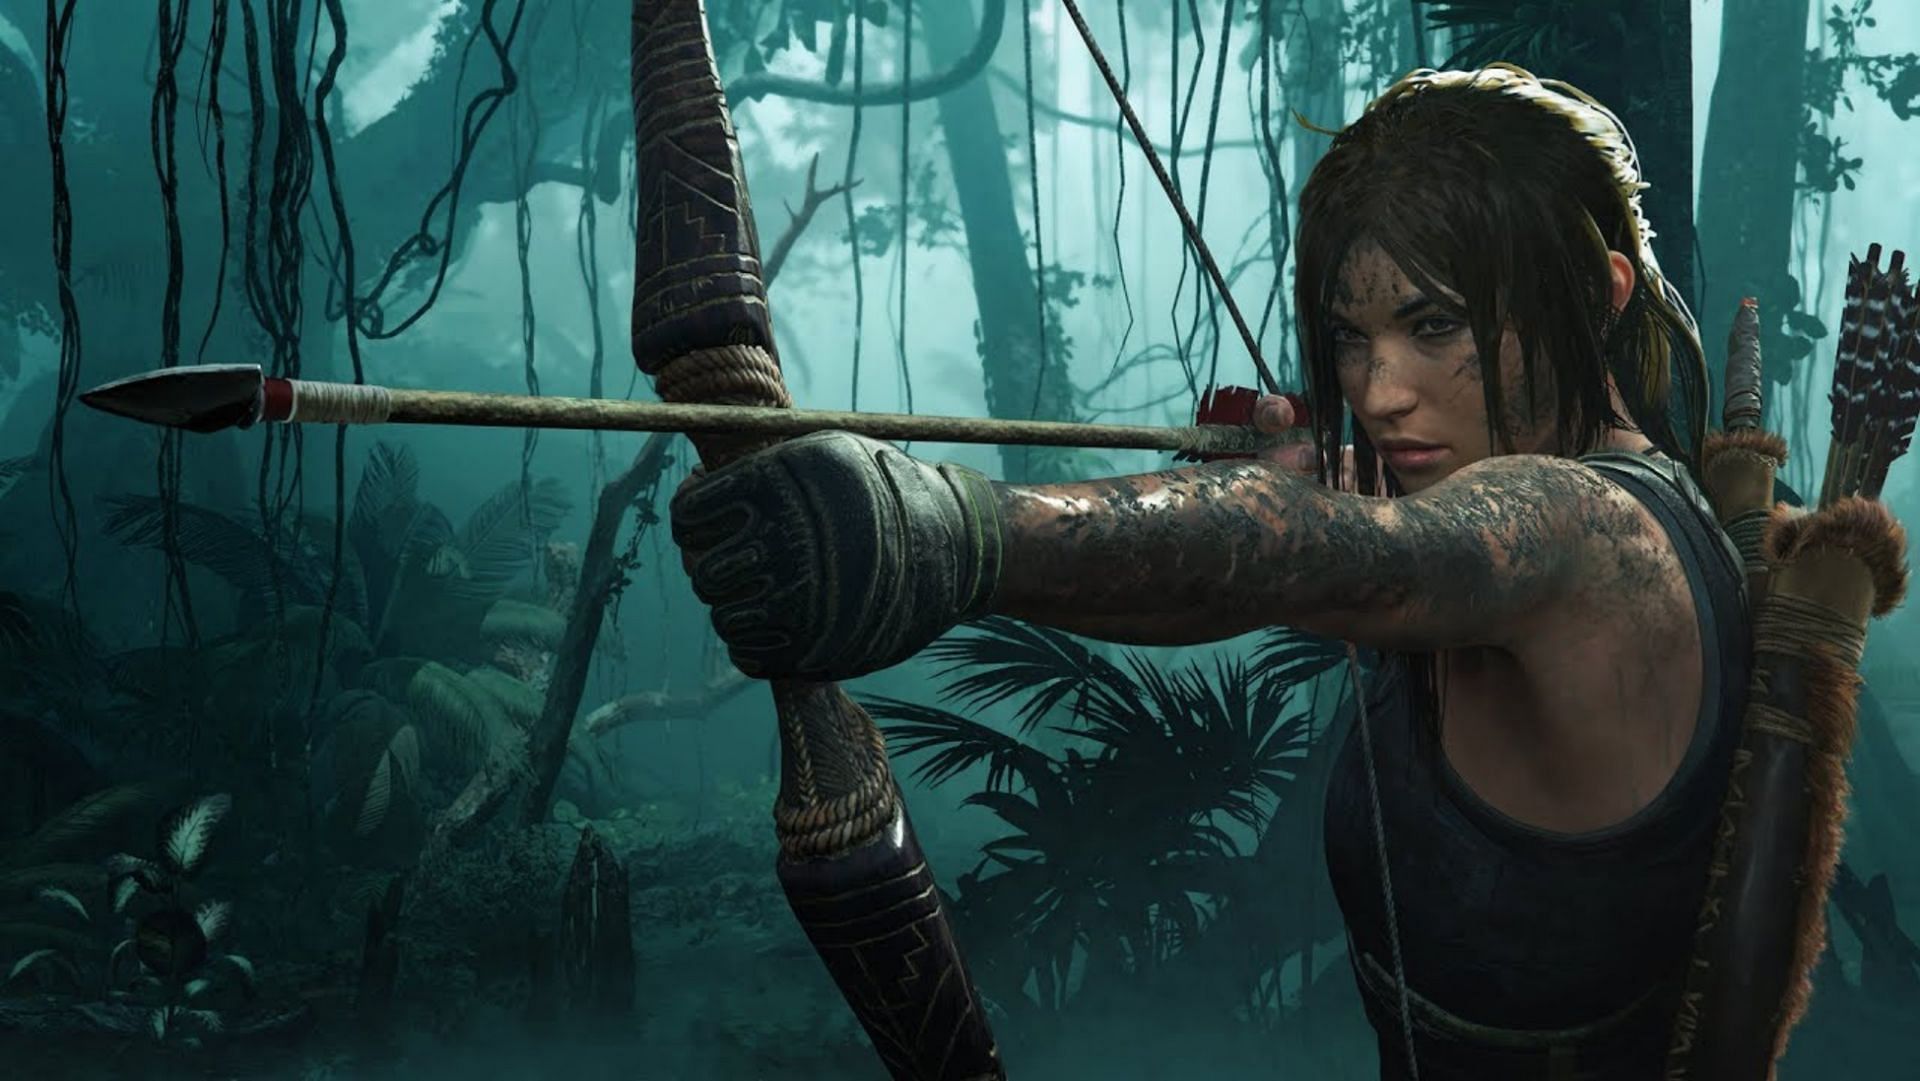 How to claim this weeks (September 1) free Epic Games Store title? Shadow of the Tomb Raider and more are up for grabs